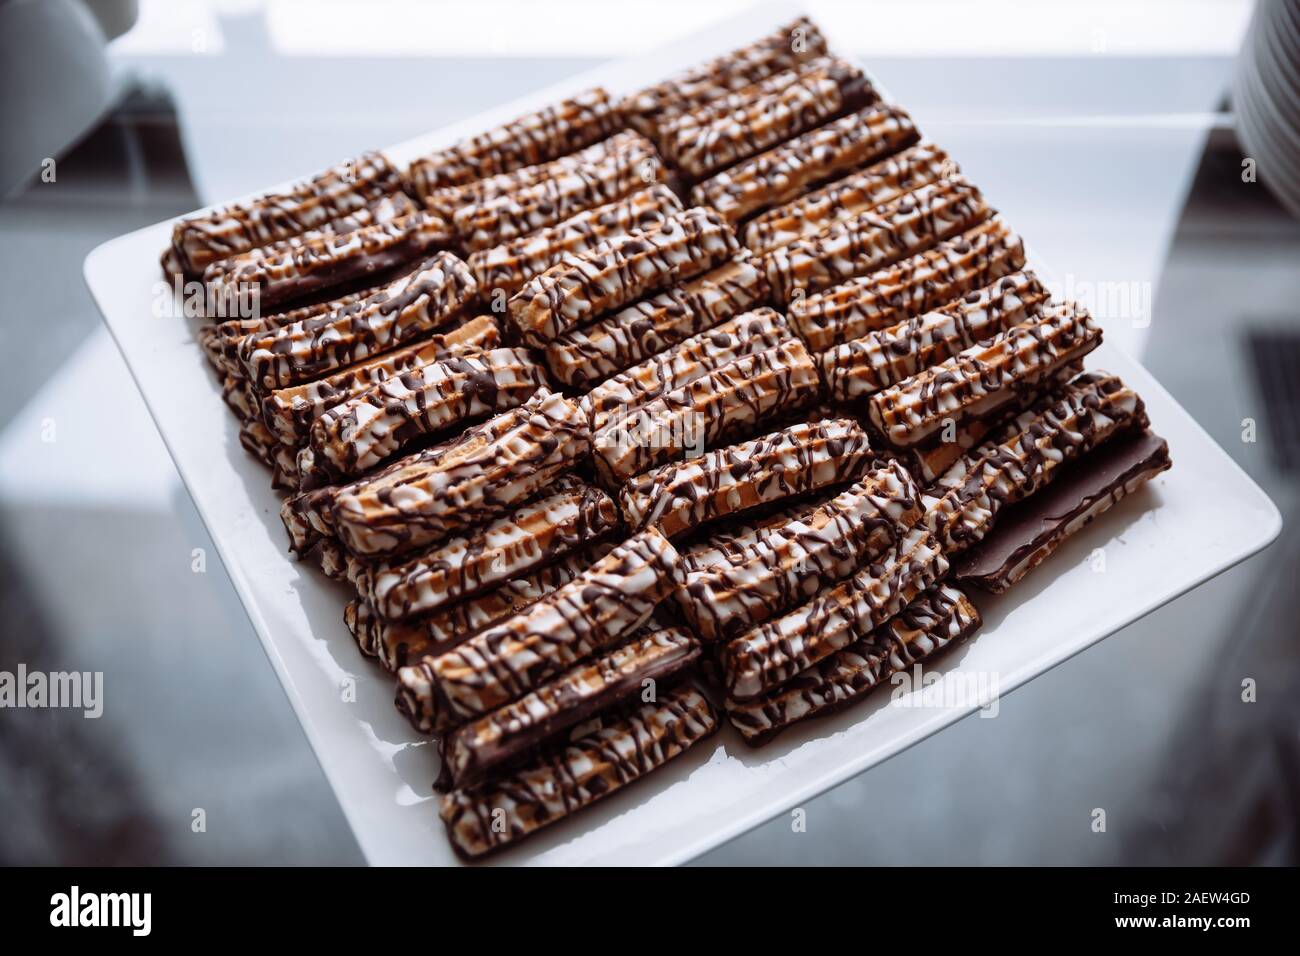 Shortbread cookies, drizzled with chocolate lying on a white, square plate. Stock Photo